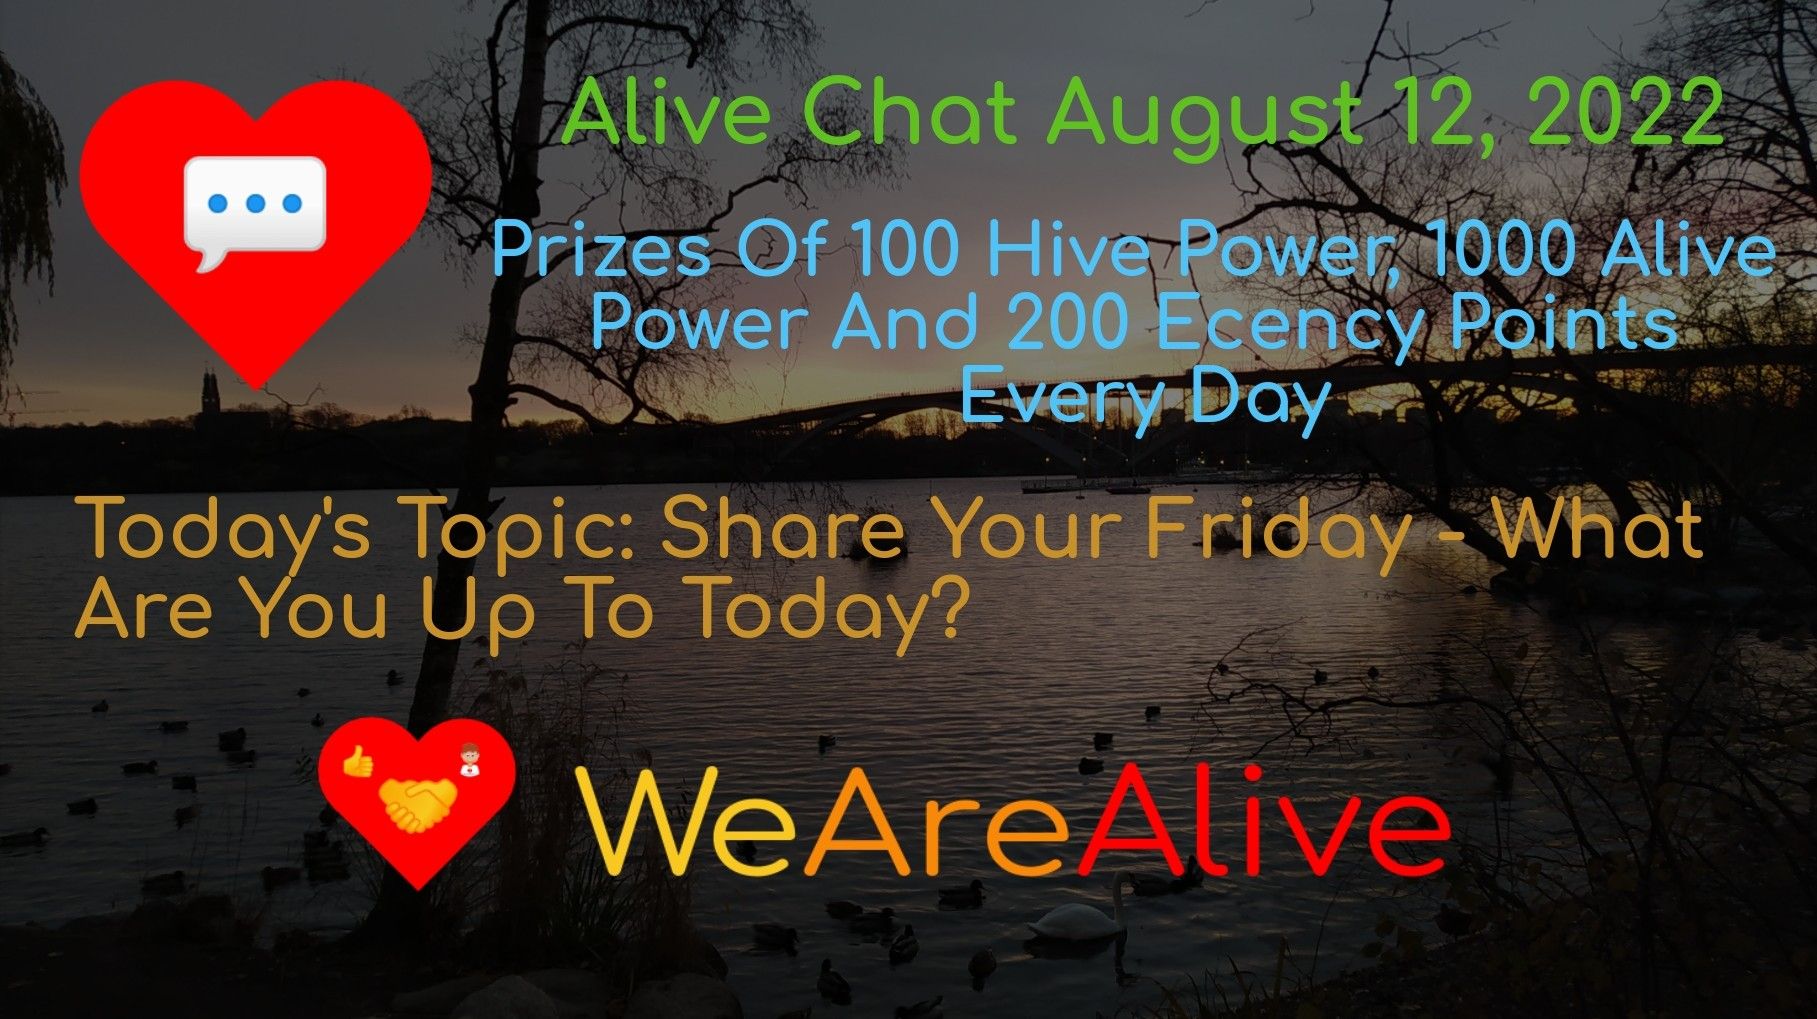 @alive.chat/alive-chat-august-12-2022-daily-prize-drawing-open-for-entries-todays-topic-share-your-friday-what-are-you-up-to-today